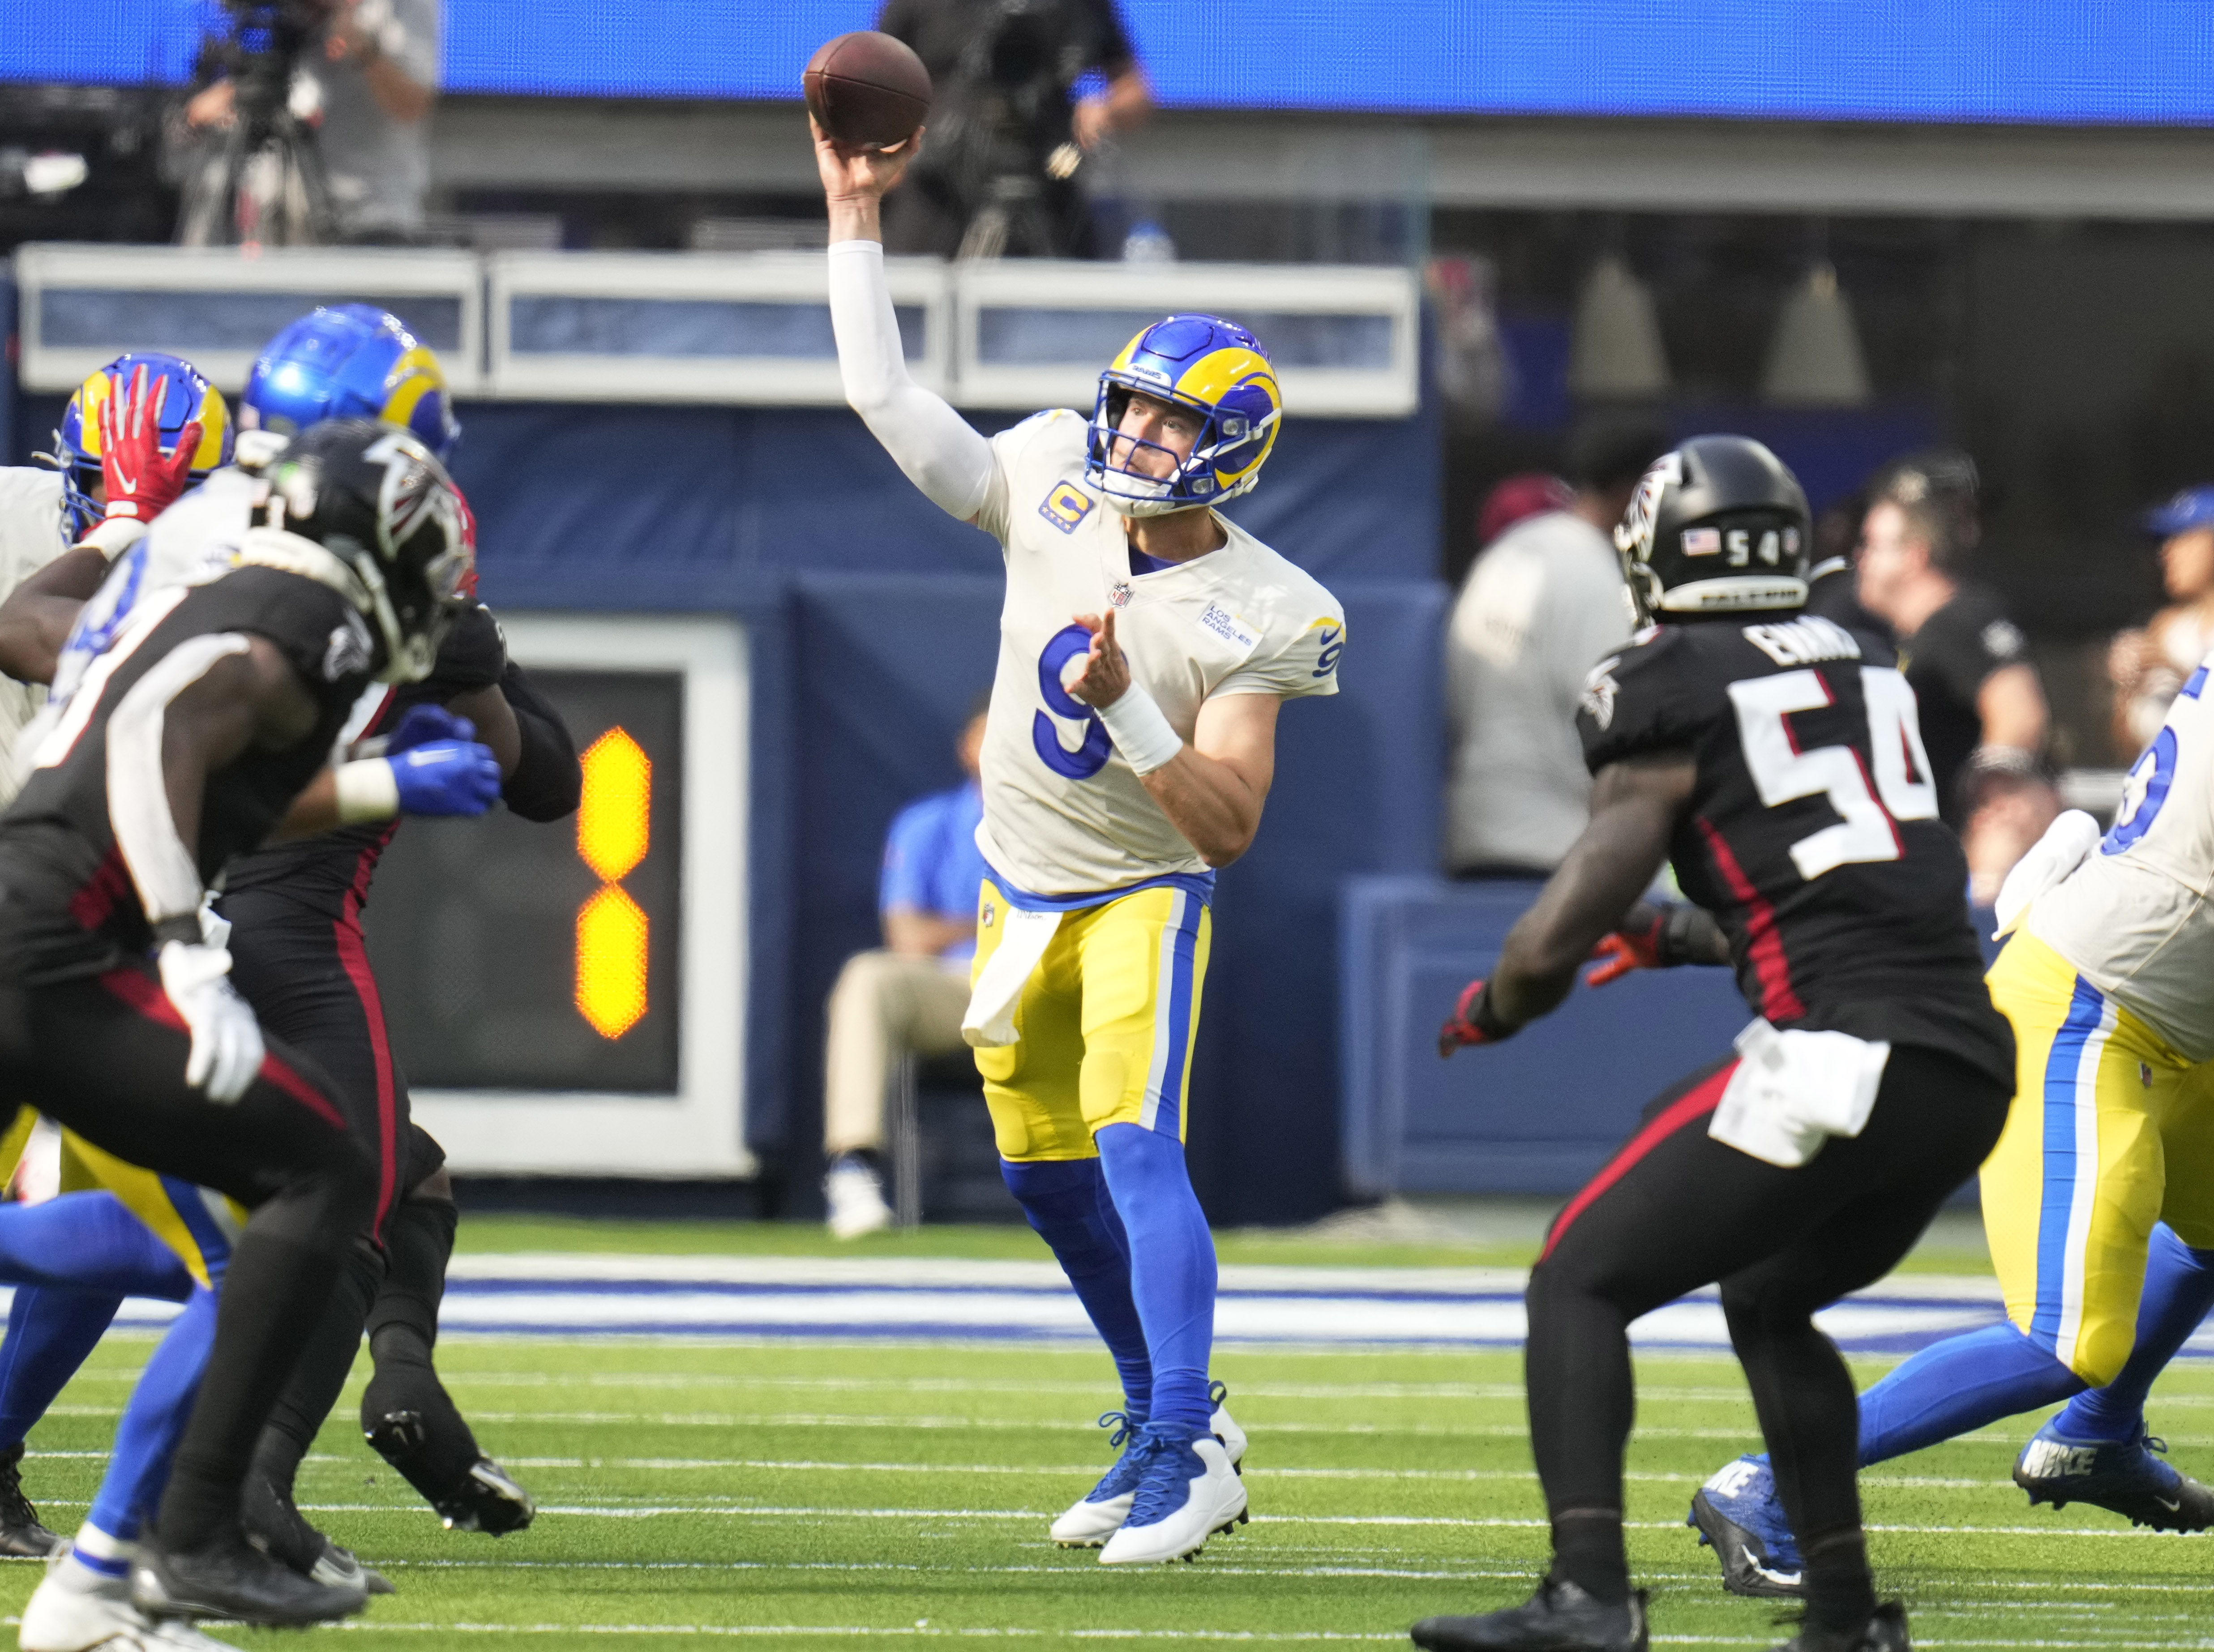 Los Angeles Rams defeated the Atlanta Falcons 31-27 during a NFL football game.